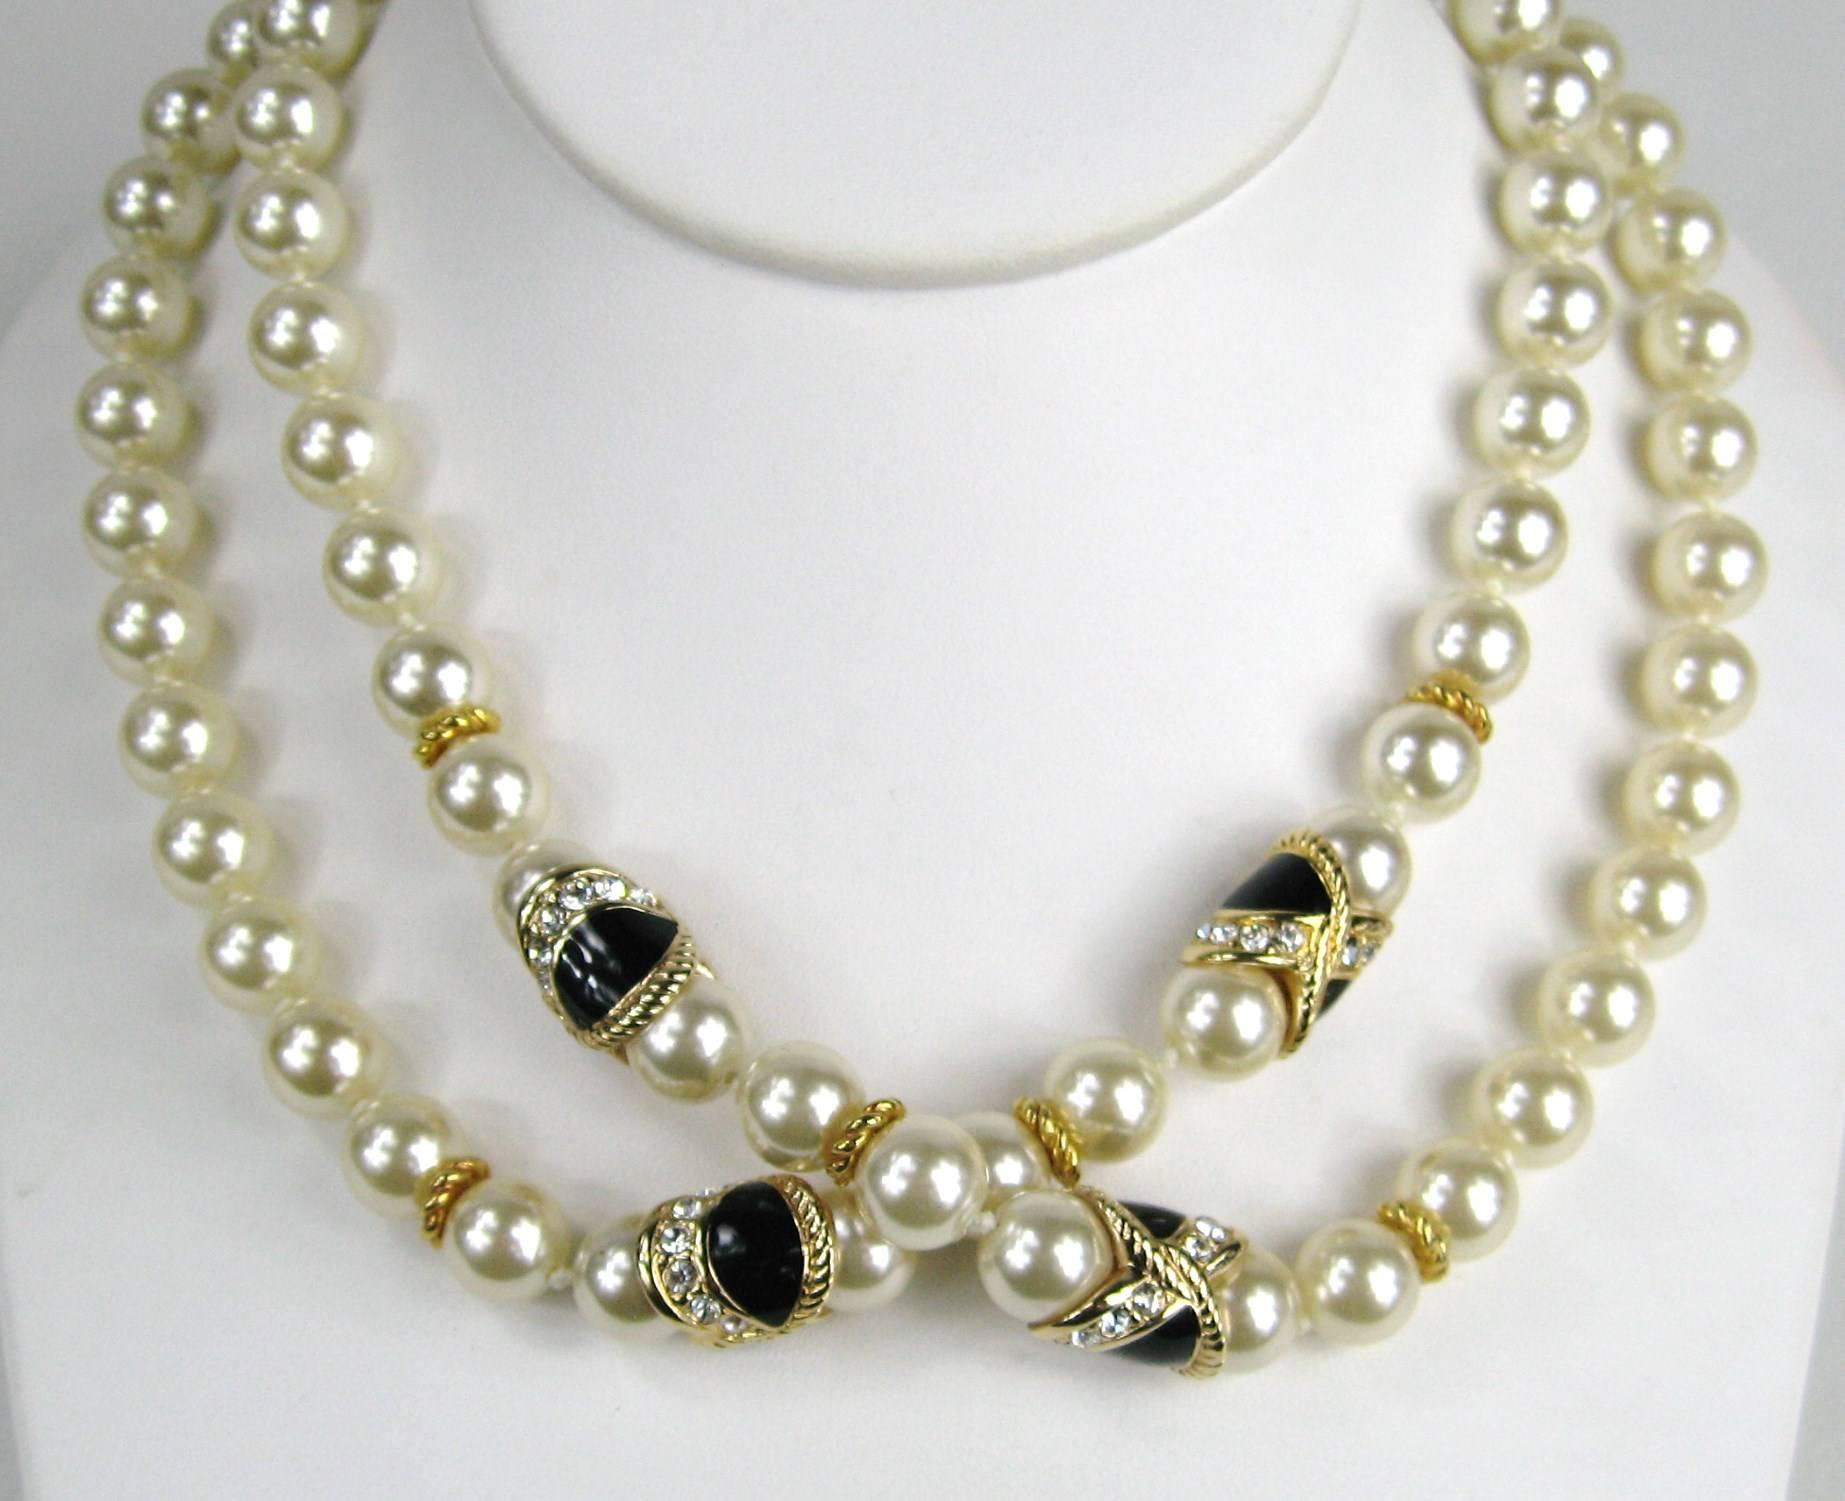 Stunning Crystal Faux Pearl necklace with black enamel. 36 inches end to end. Pearls are 9.9 mm. We have many more Ciner pieces on our storefront. This is out of our massive collection of Hopi, Zuni, Navajo, Southwestern, sterling silver, costume